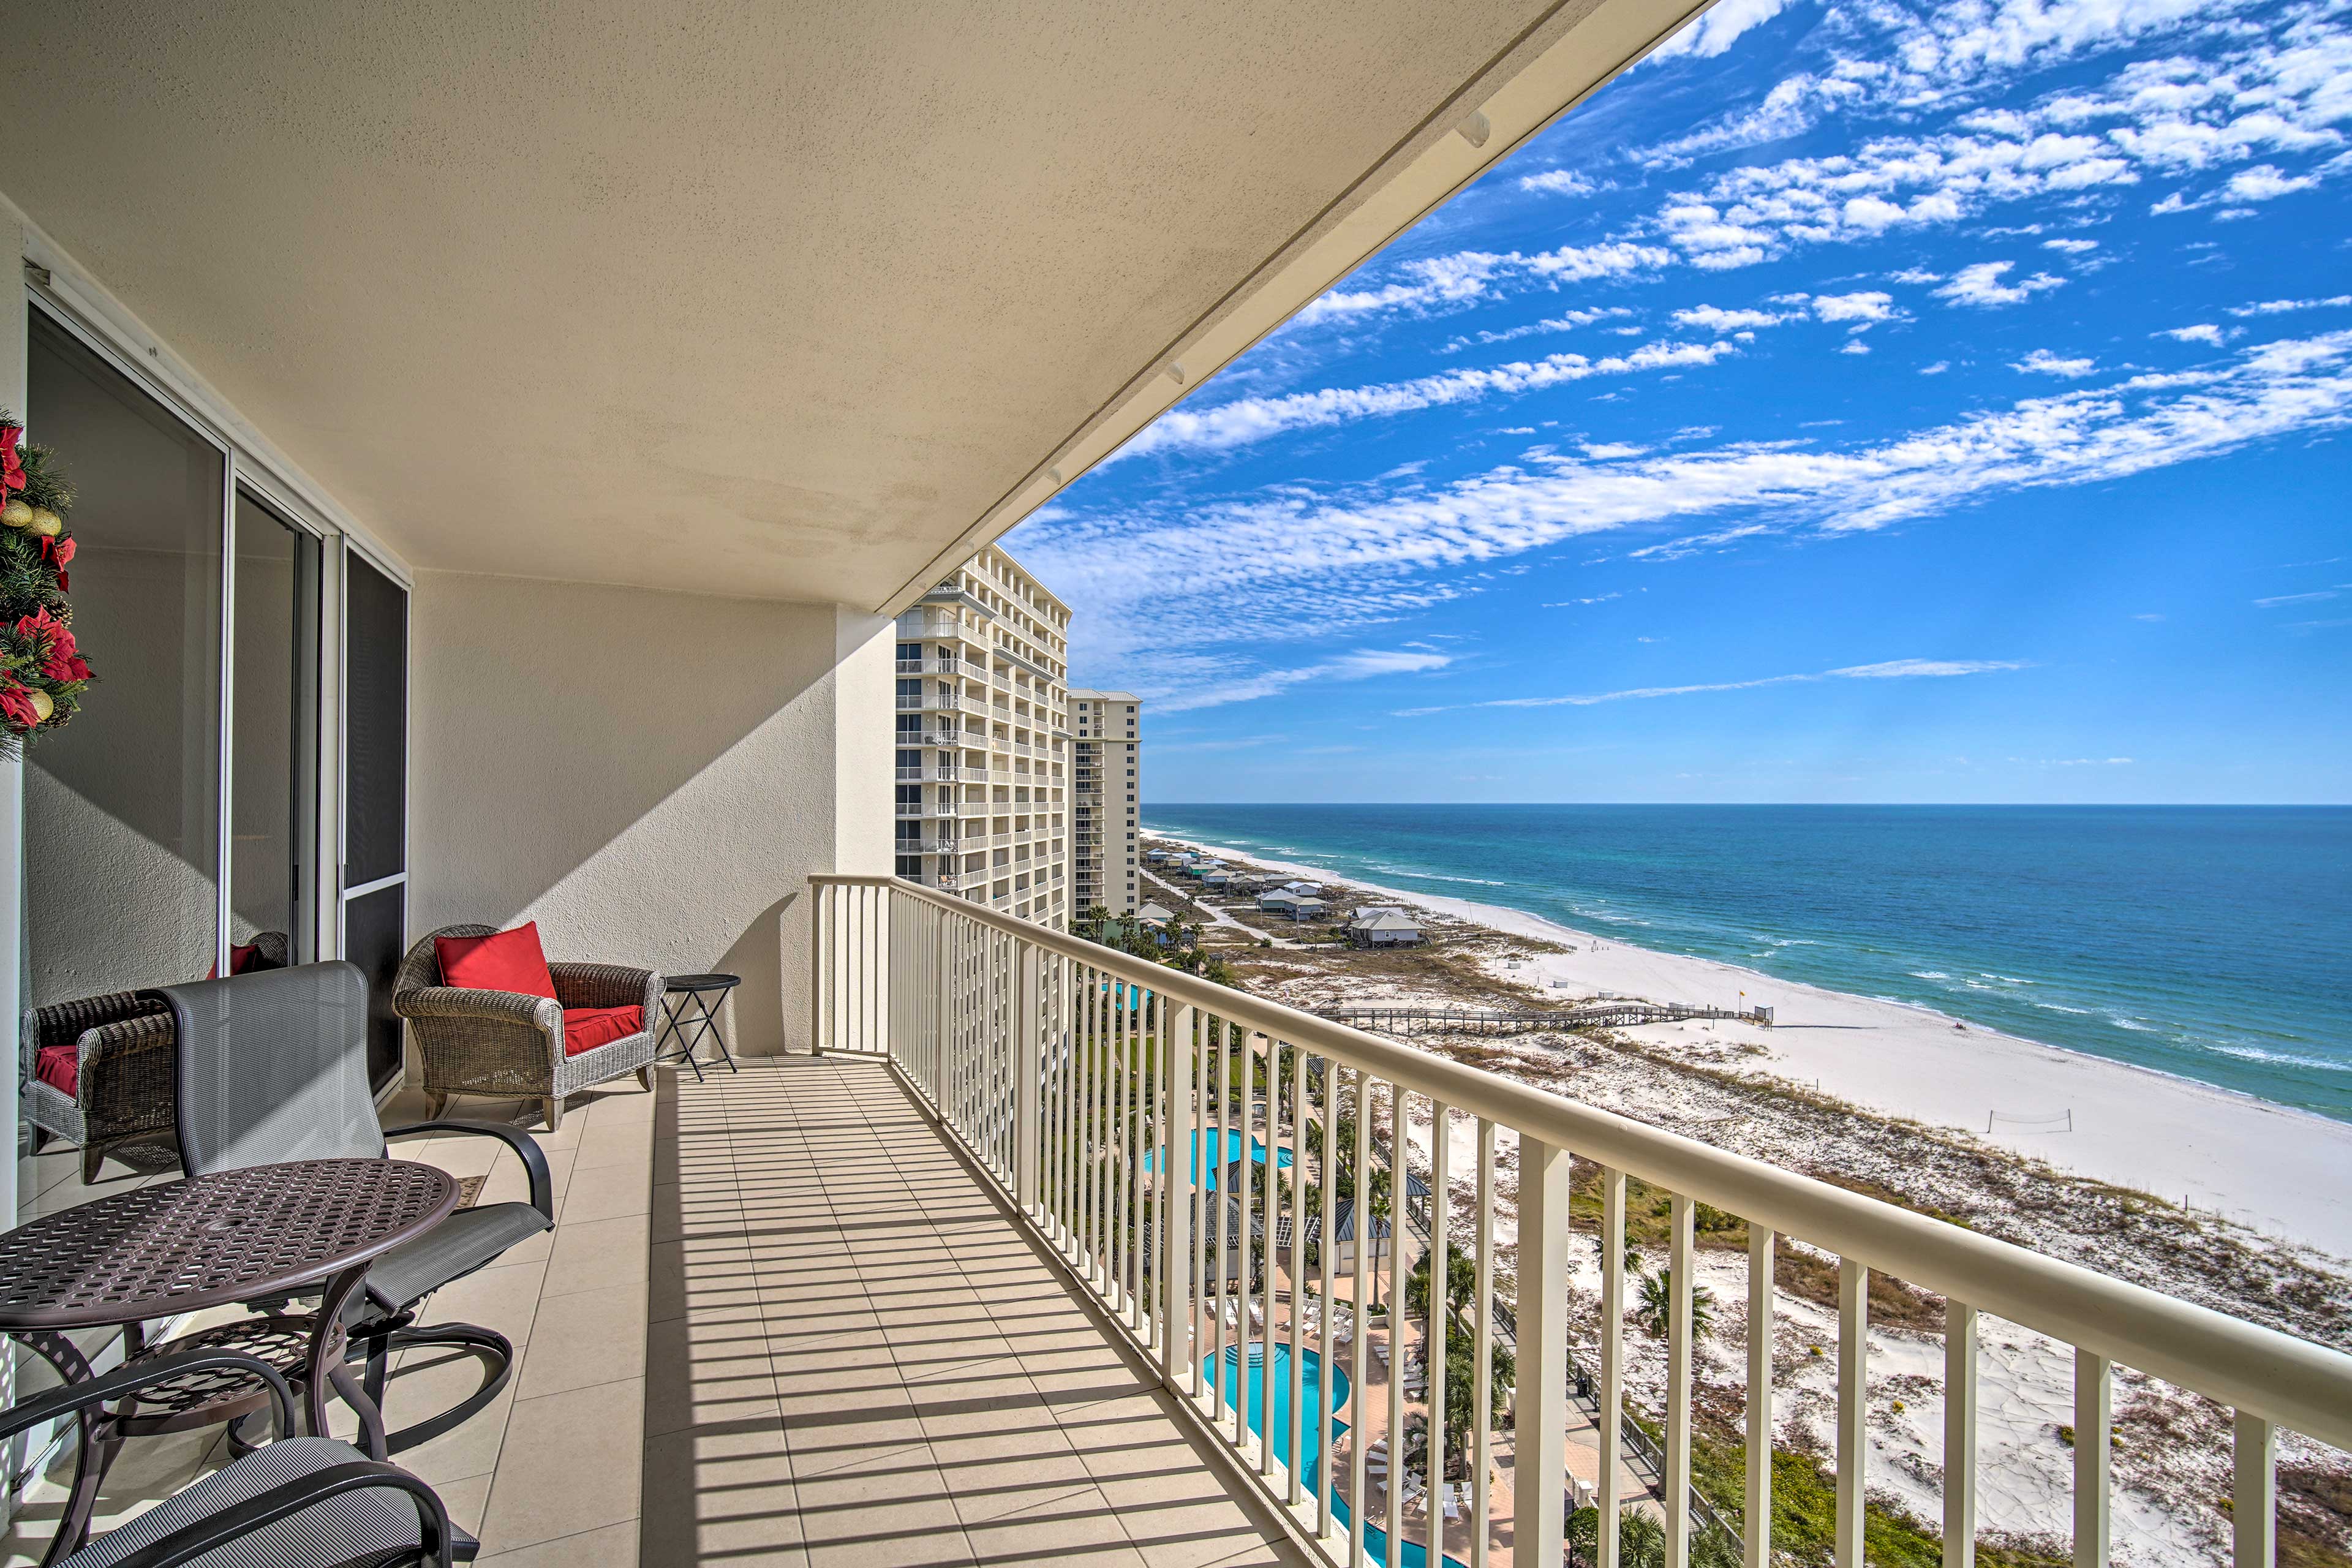 Property Image 1 - Waterfront Gulf Shores Escape w/ Resort Amenities!